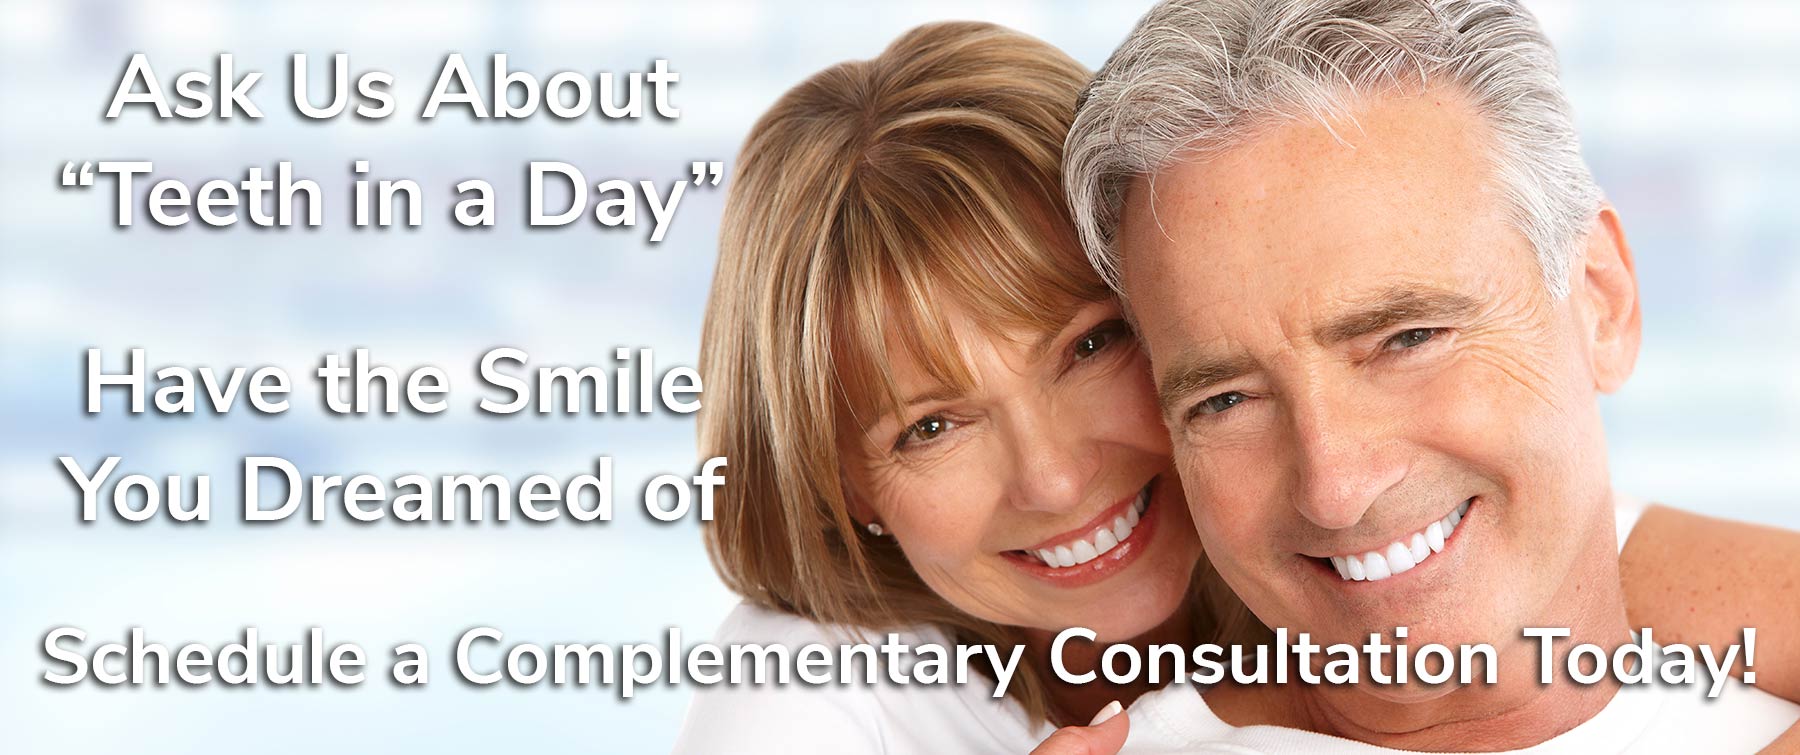 Teeth in a Day Banner Photo